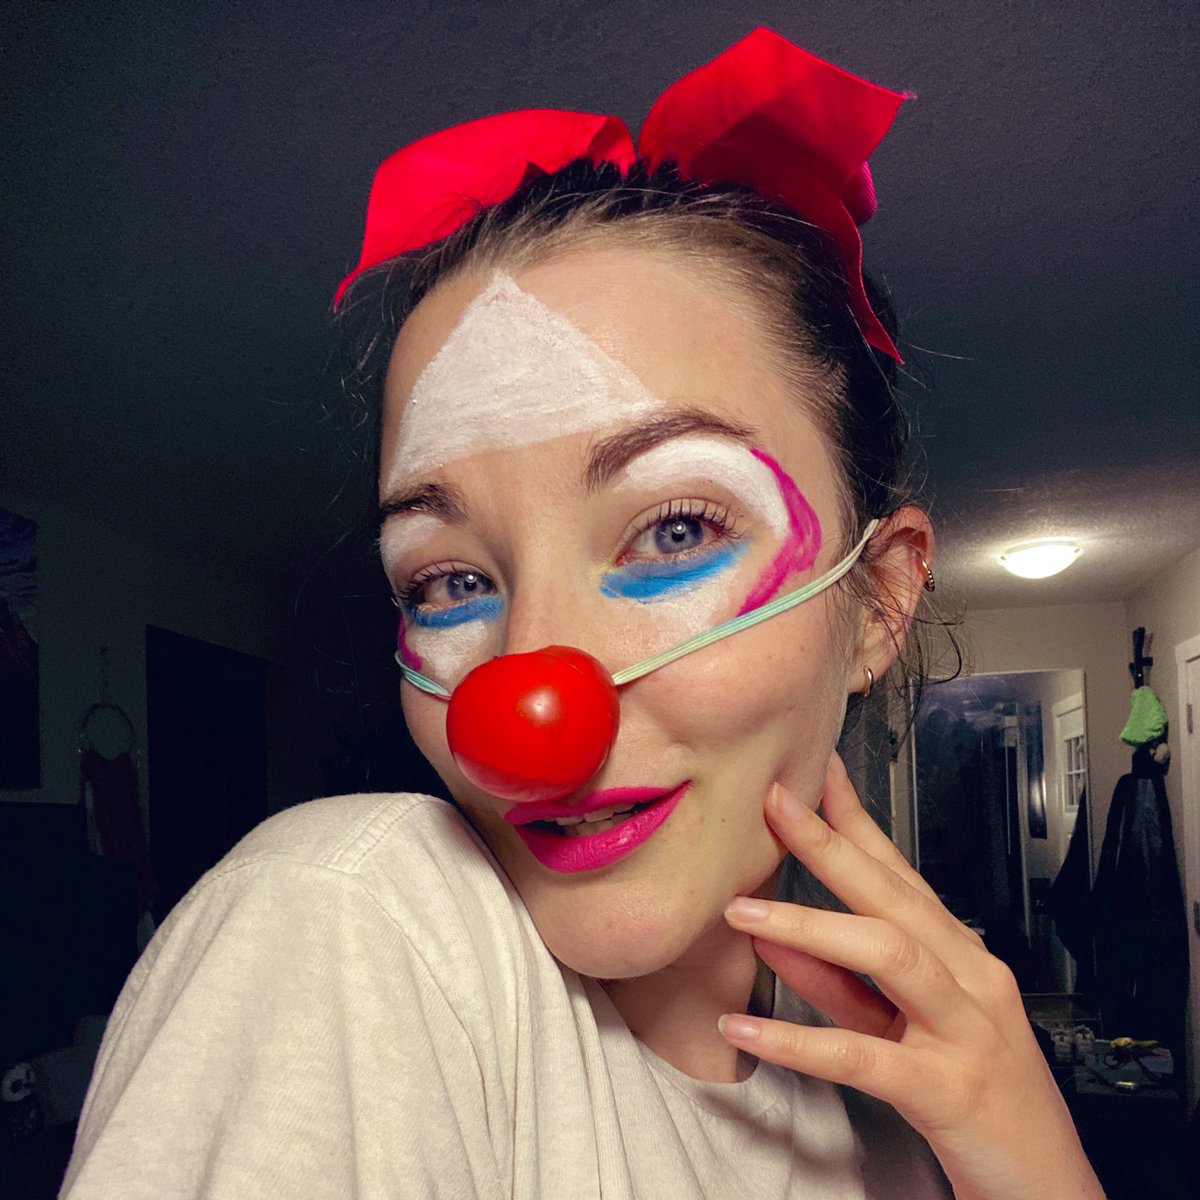 we played the “things I loved to do as a kid” game to get to know each other, then mom talked us into our Fools & we got to experiment w our masks - choosing only a couple key costume items was an amazingly fun task & I made make-up discoveries I’m surprised and DELIGHTED with 